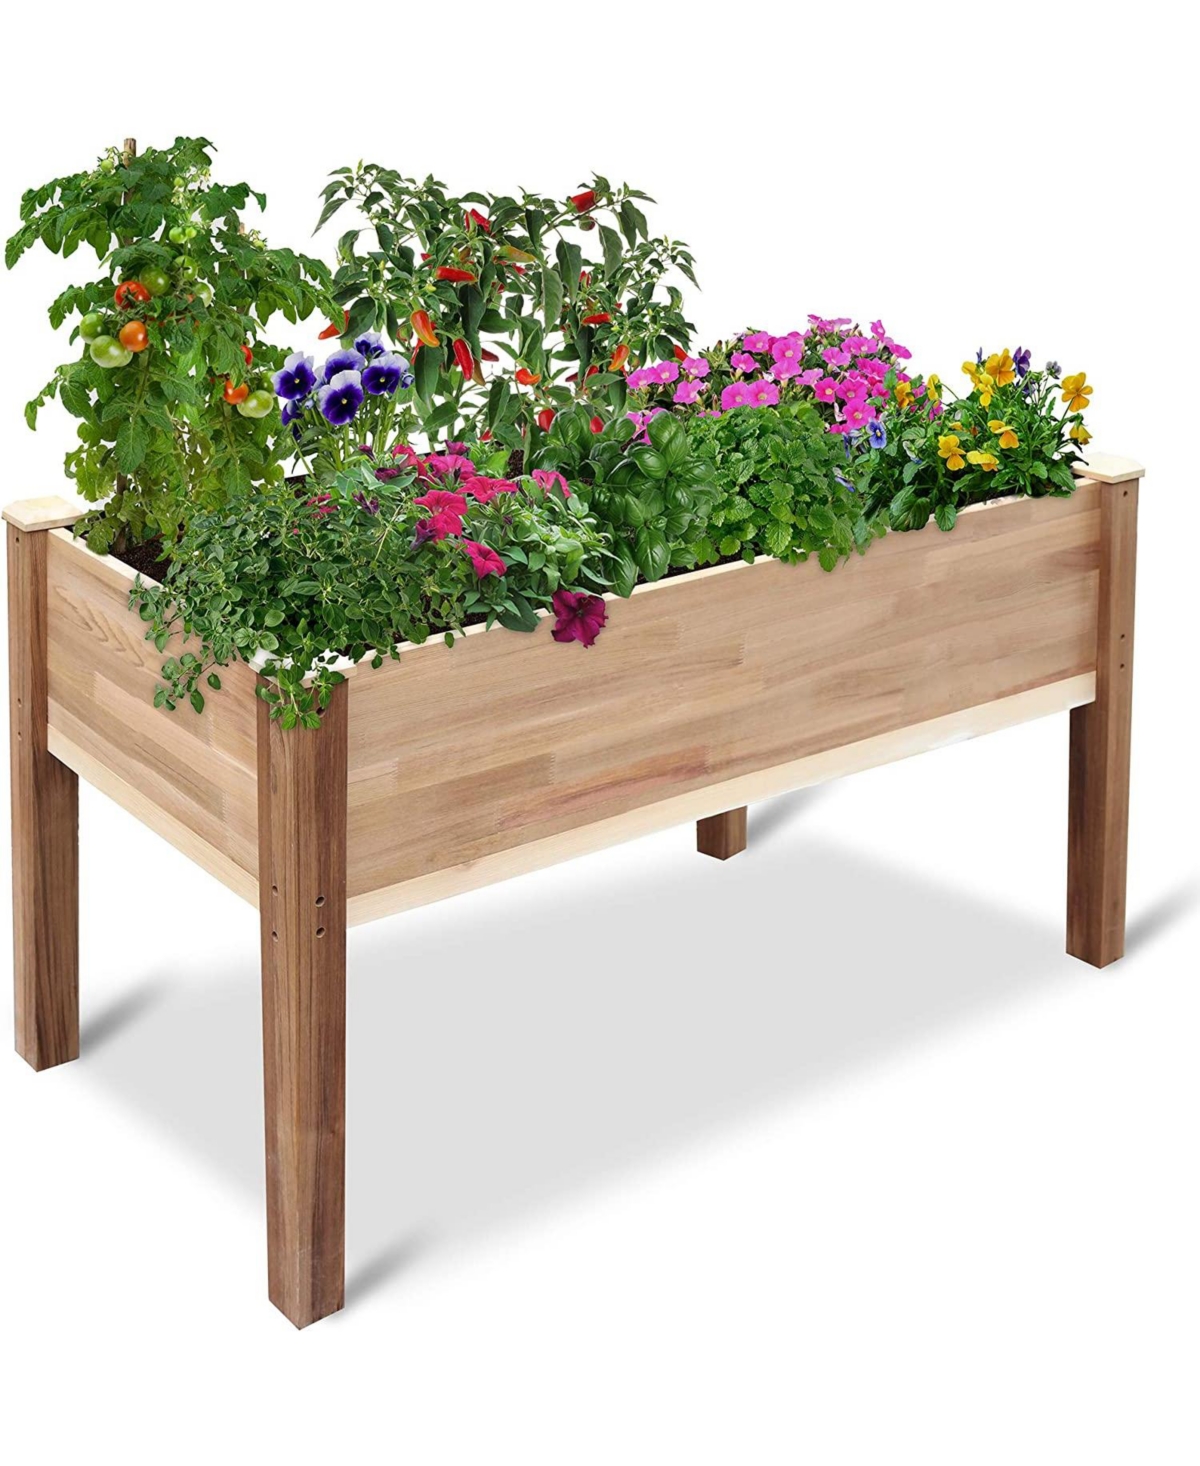 Raised Garden Bed Elevated Herb Planter for Growing Fresh Flower - Brown